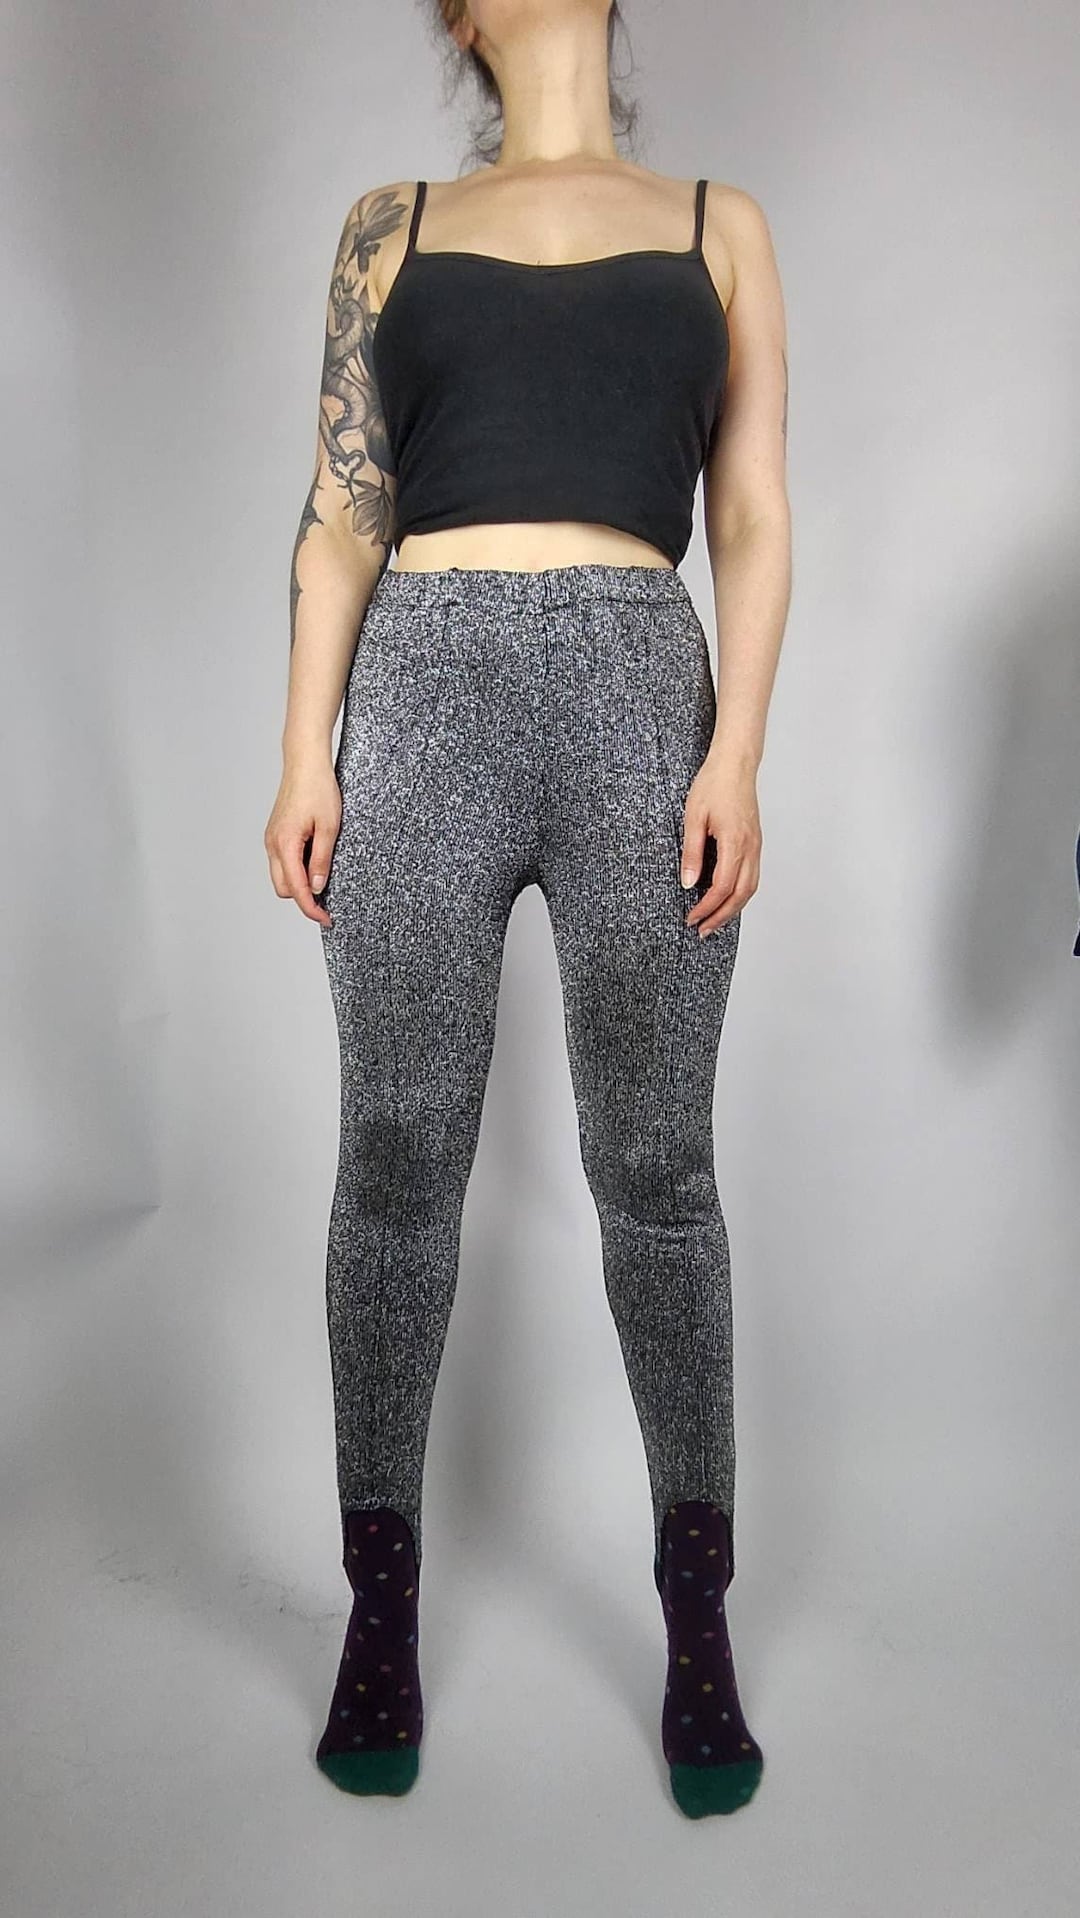 Vintage Glitter Leggings Silver Black S/M, Metallic Trousers, Glam Rock  Party Outfit, 80s 90s Stirrup Pants, Foot Rubber Band Loop -  Norway